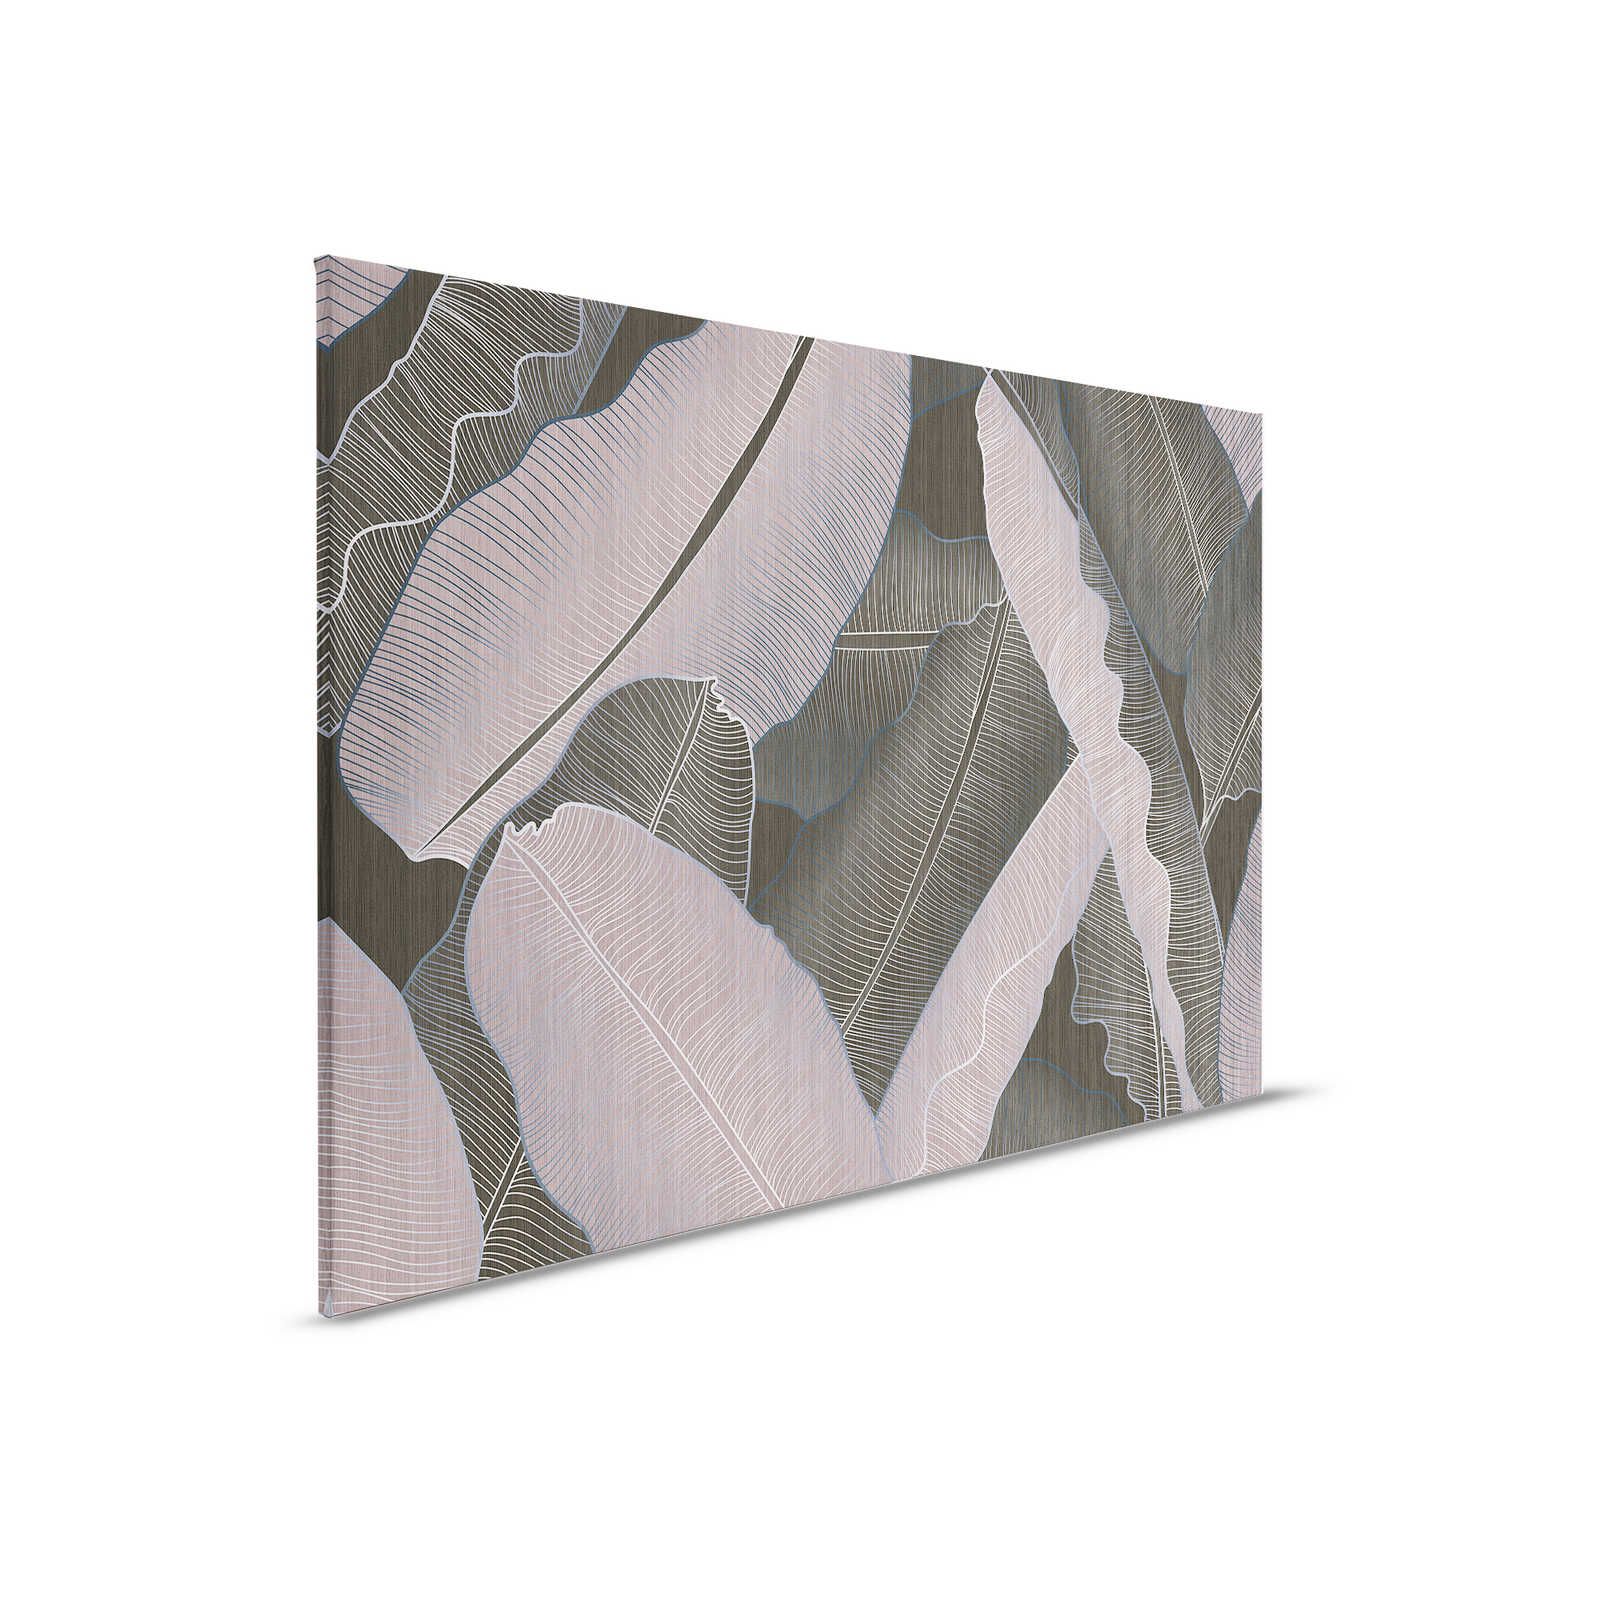 Under Cover 2 - Palm Leaf Canvas Painting Grey & Pink Drawing Style - 0.90 m x 0.60 m
